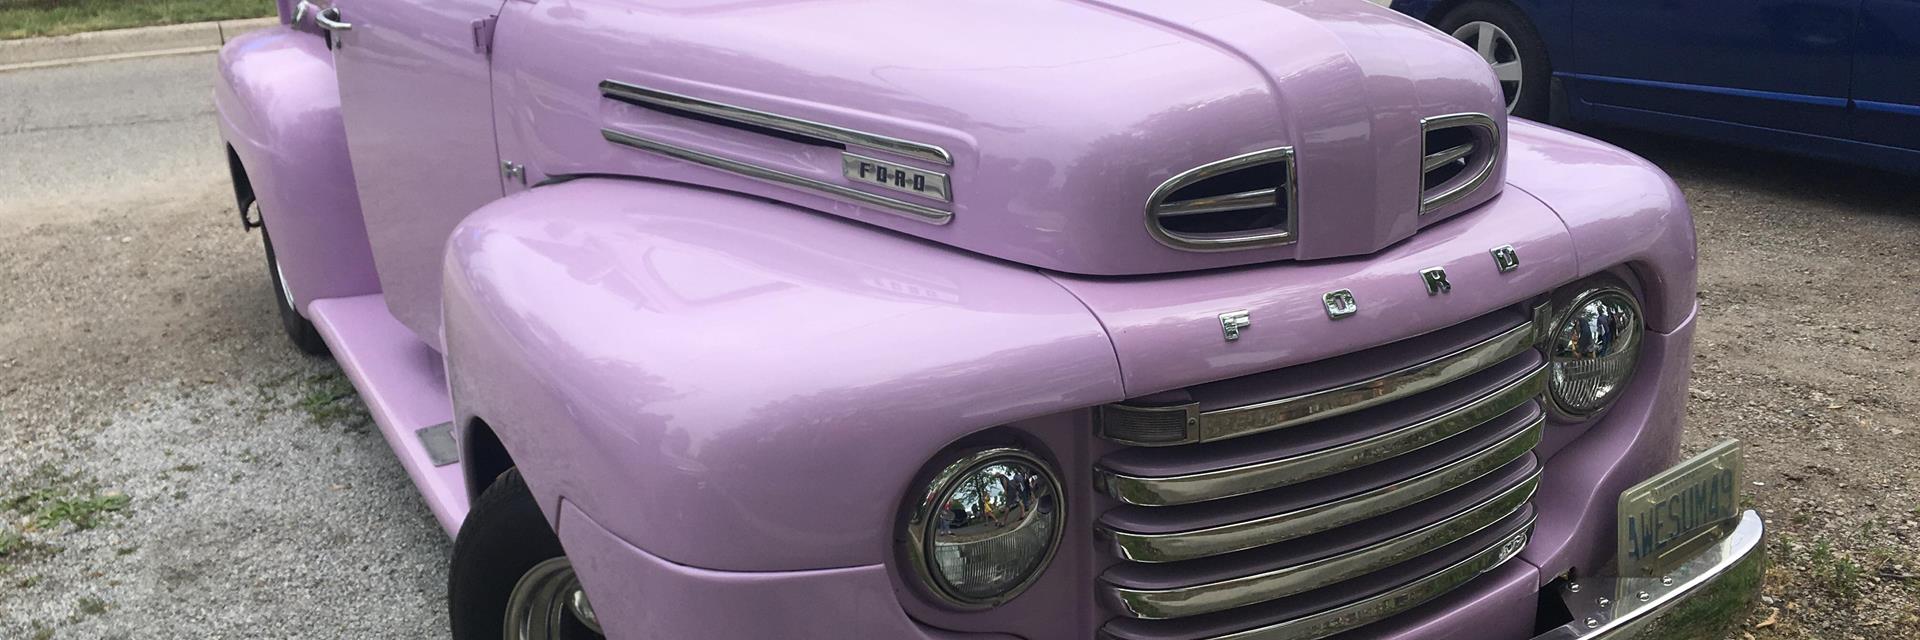 a purlple classic truck parked on the grass at a car show in chatham-kent 